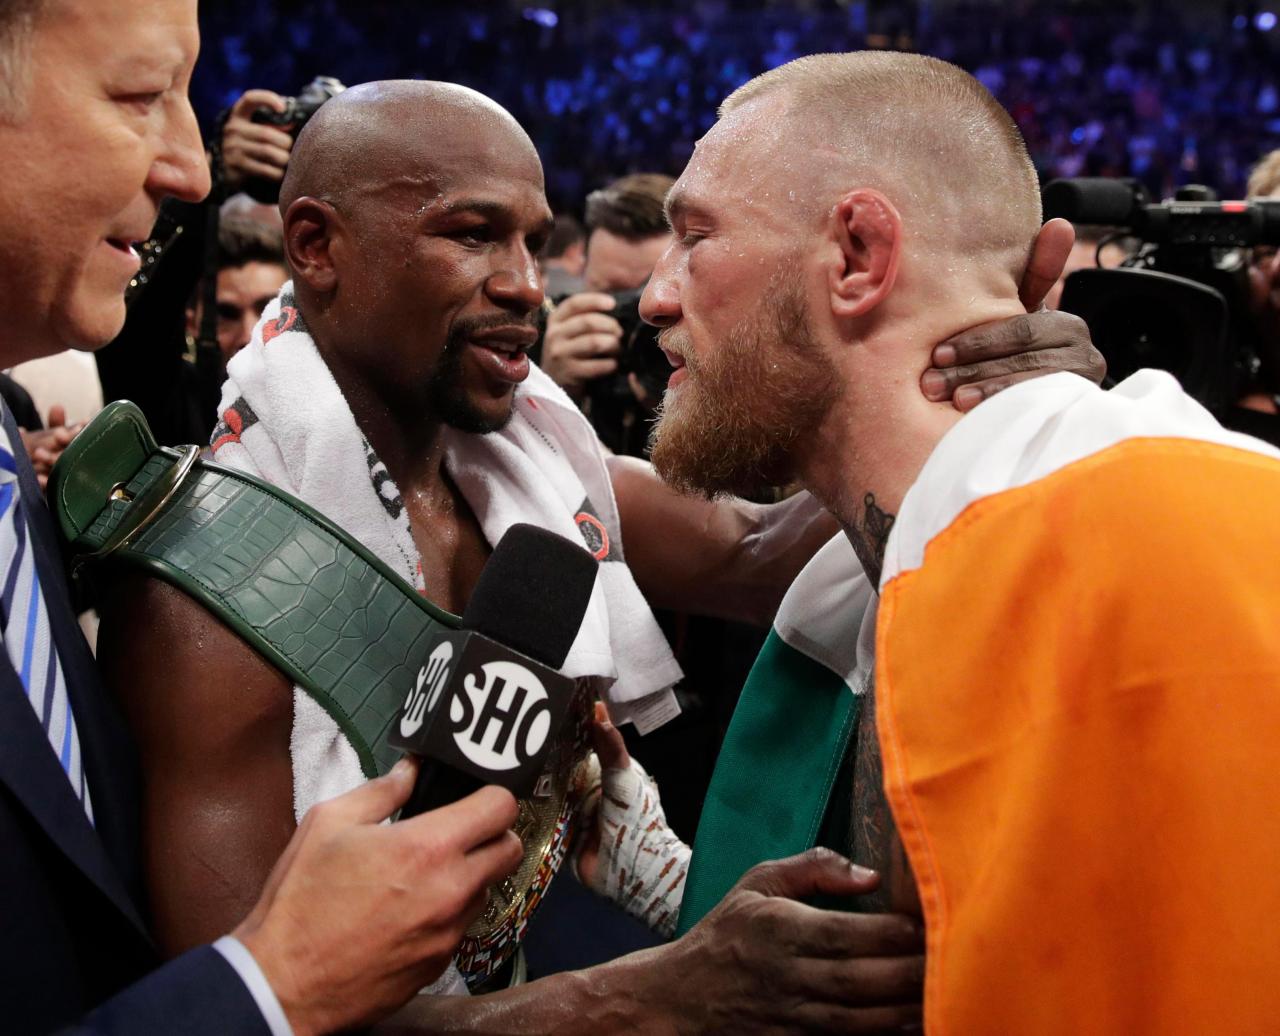  Mayweather showed his respect for McGregor after their fight in Las Vegas